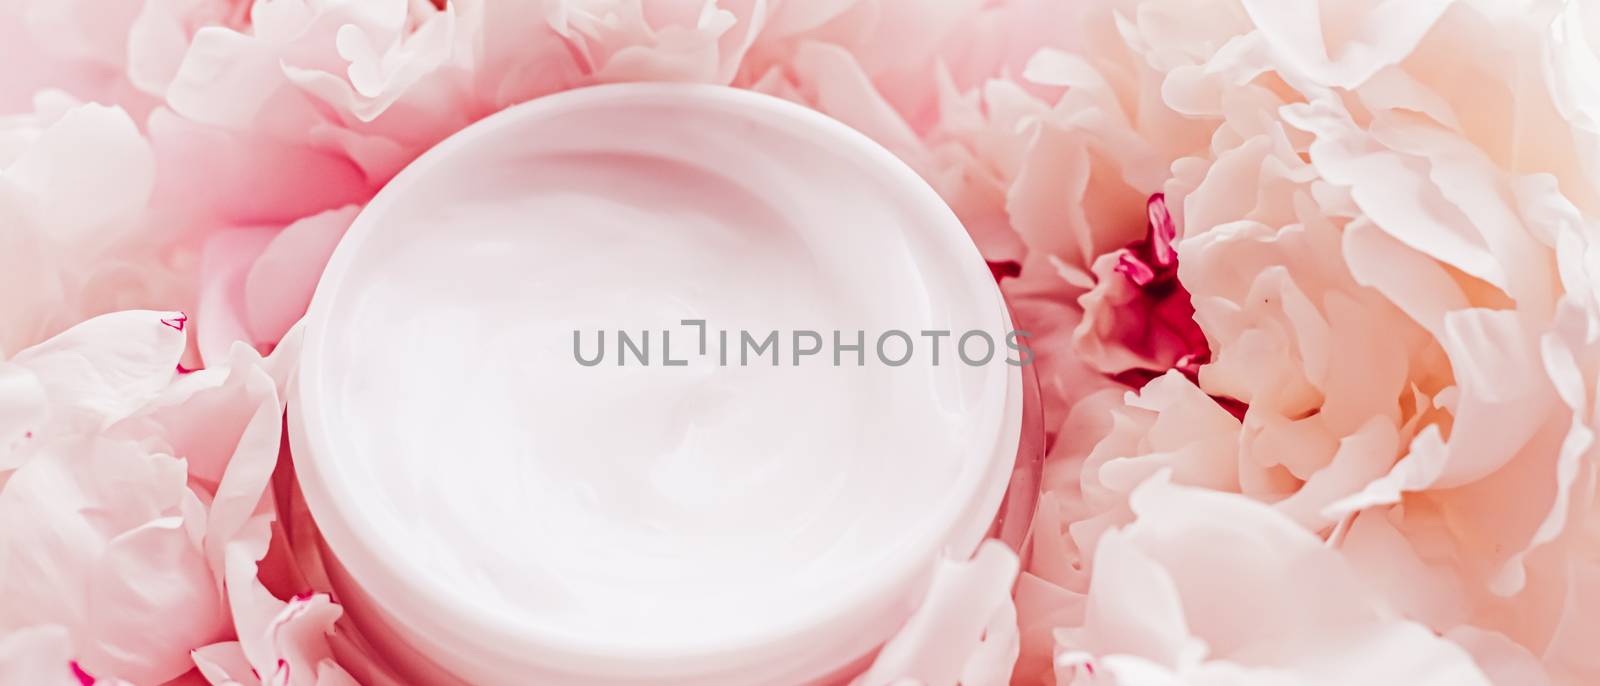 Luxe cosmetic cream jar as antiaging skincare routine product on background of peony flowers, body moisturizer and beauty branding by Anneleven